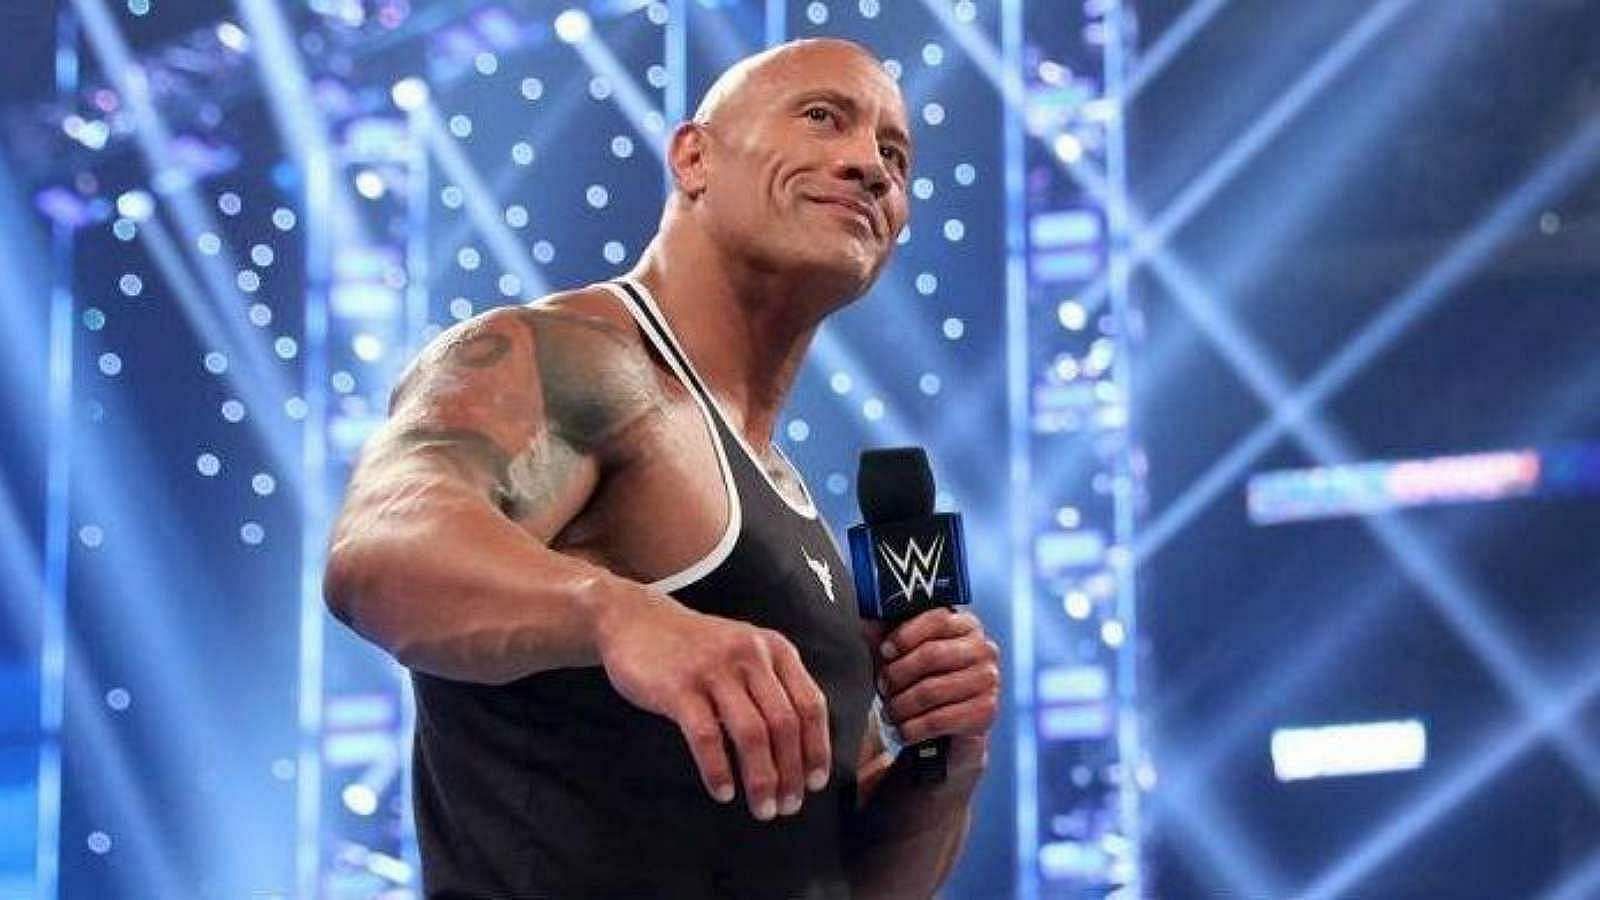 The Rock returned to WWE on SmackDown